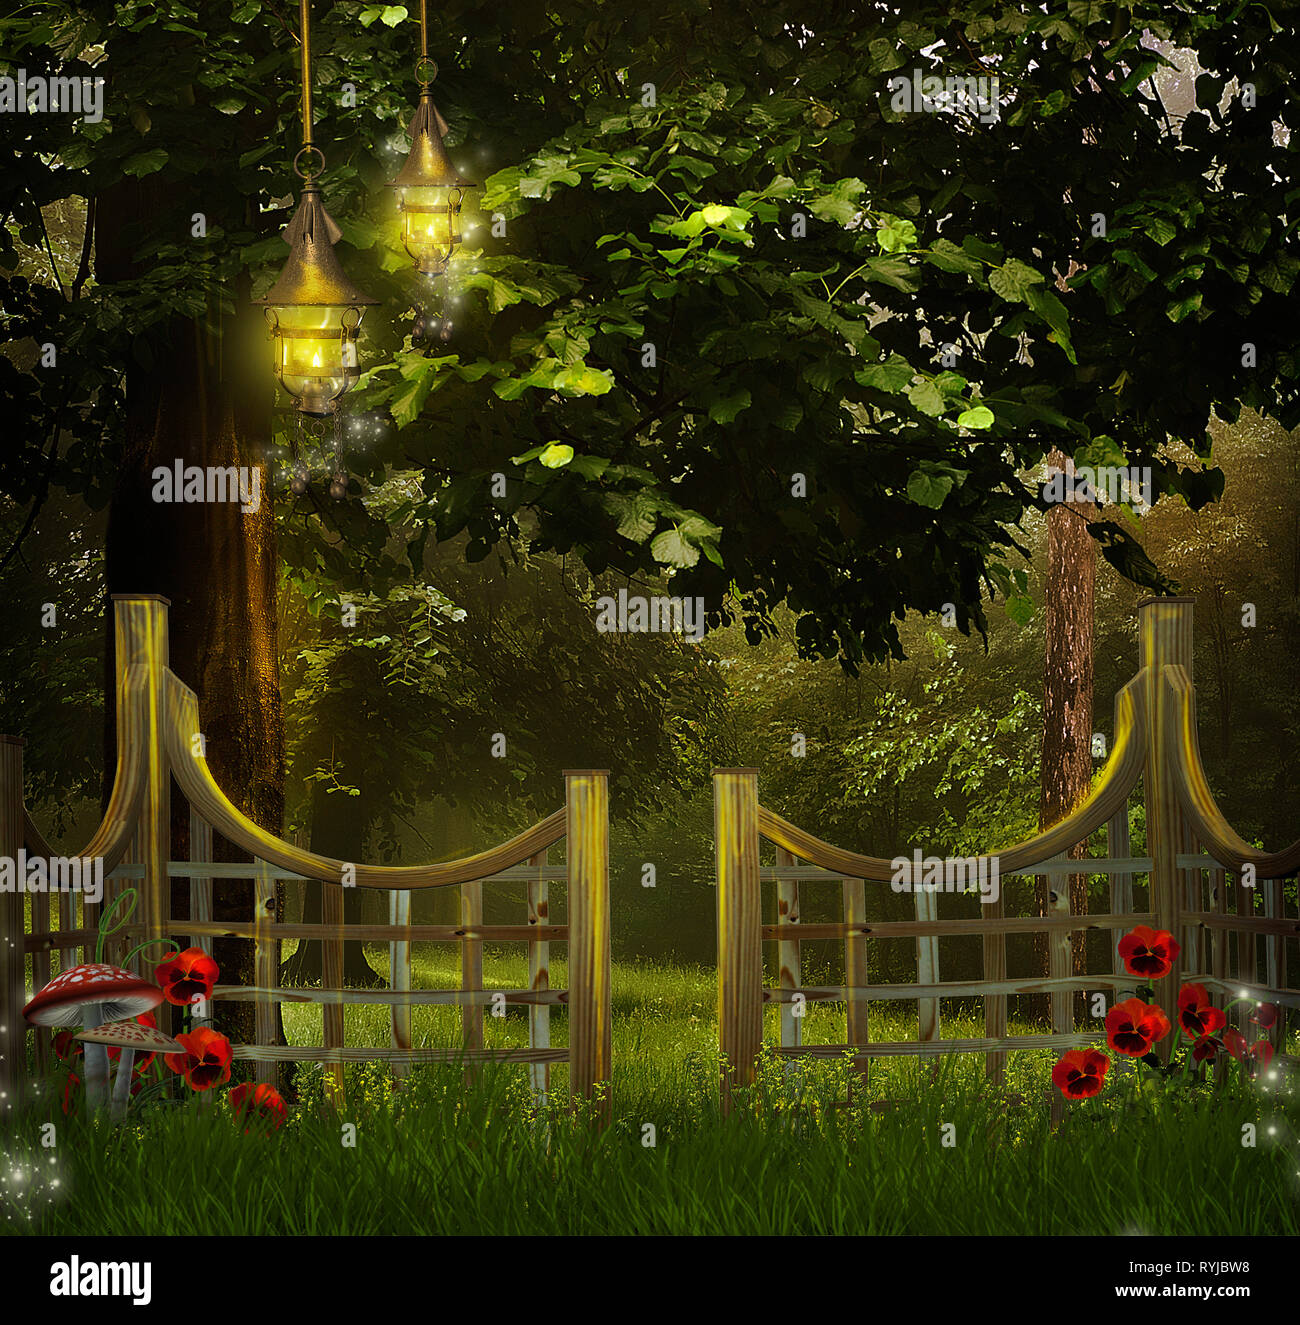 3d illustration fantasy graphic background of trees, flowers,fence and  mushrooms Stock Photo - Alamy